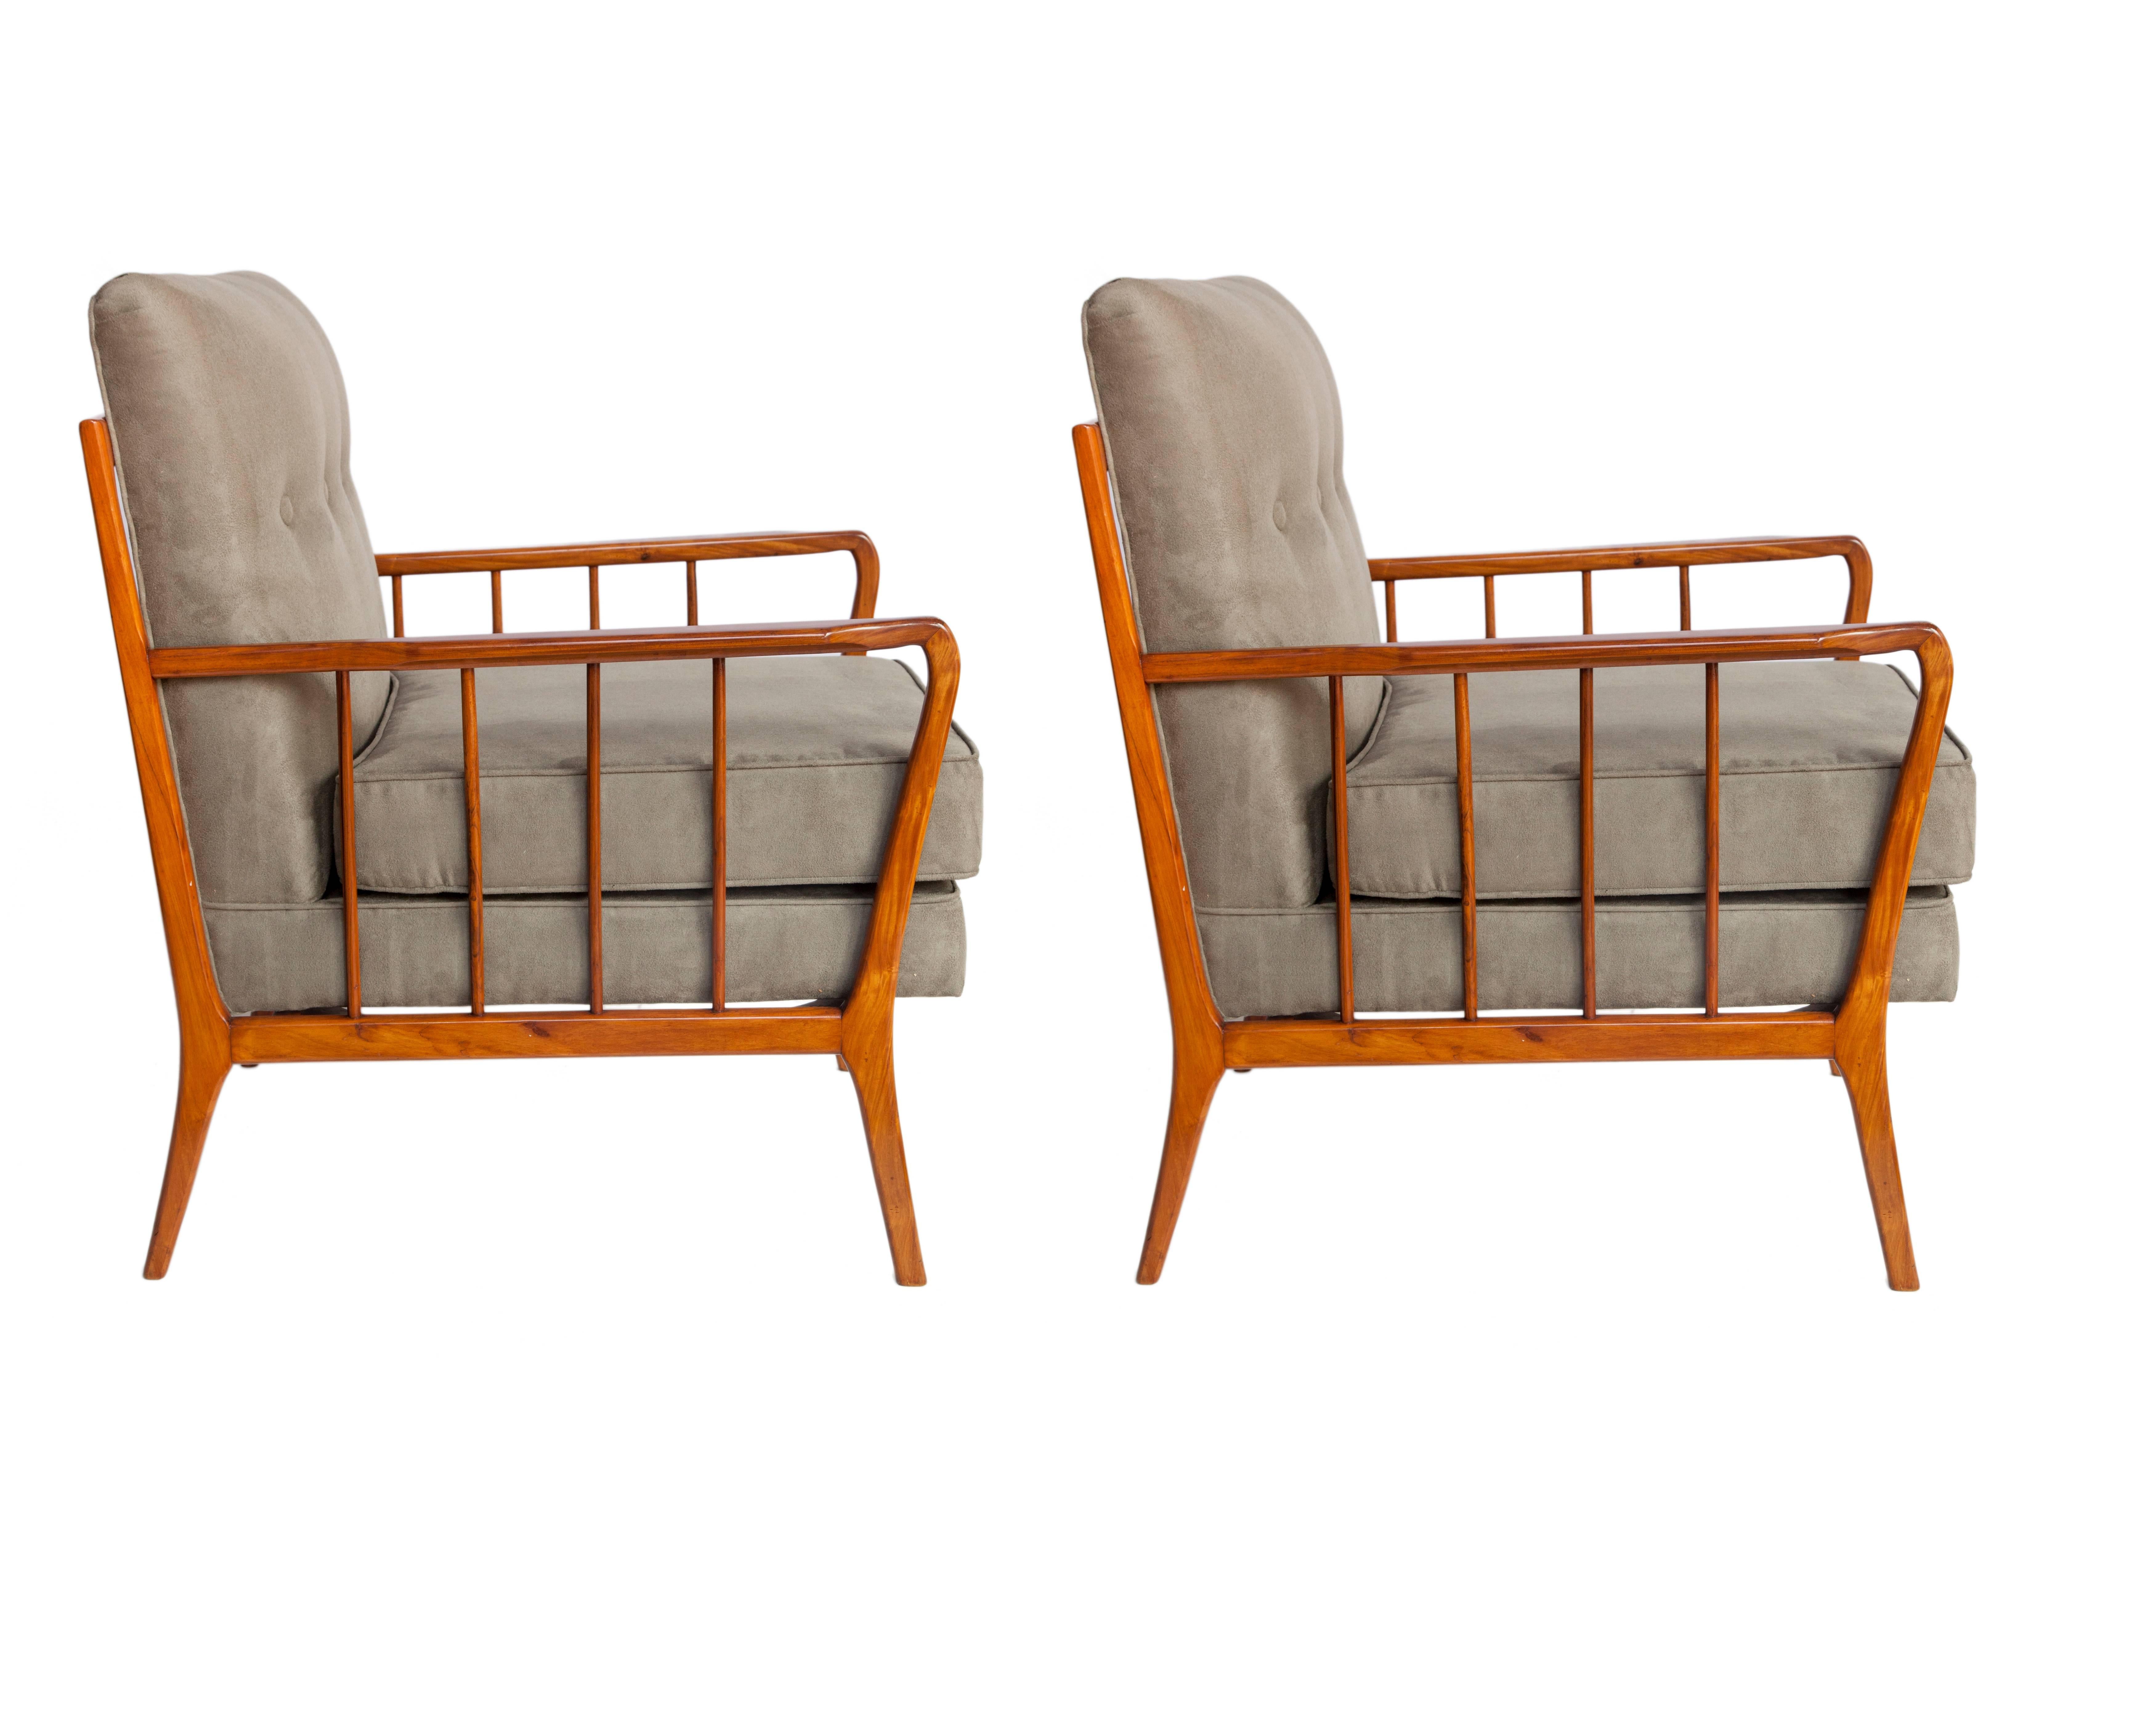 Pair of Rino Levi Mid-Century Modern armchairs produced in Brazil, during the 1950s. The chair frames are crafted from Brazilian caviuna wood with posted arms and tapered legs. Recently re-upholstered in moss green artificial suede. The chairs